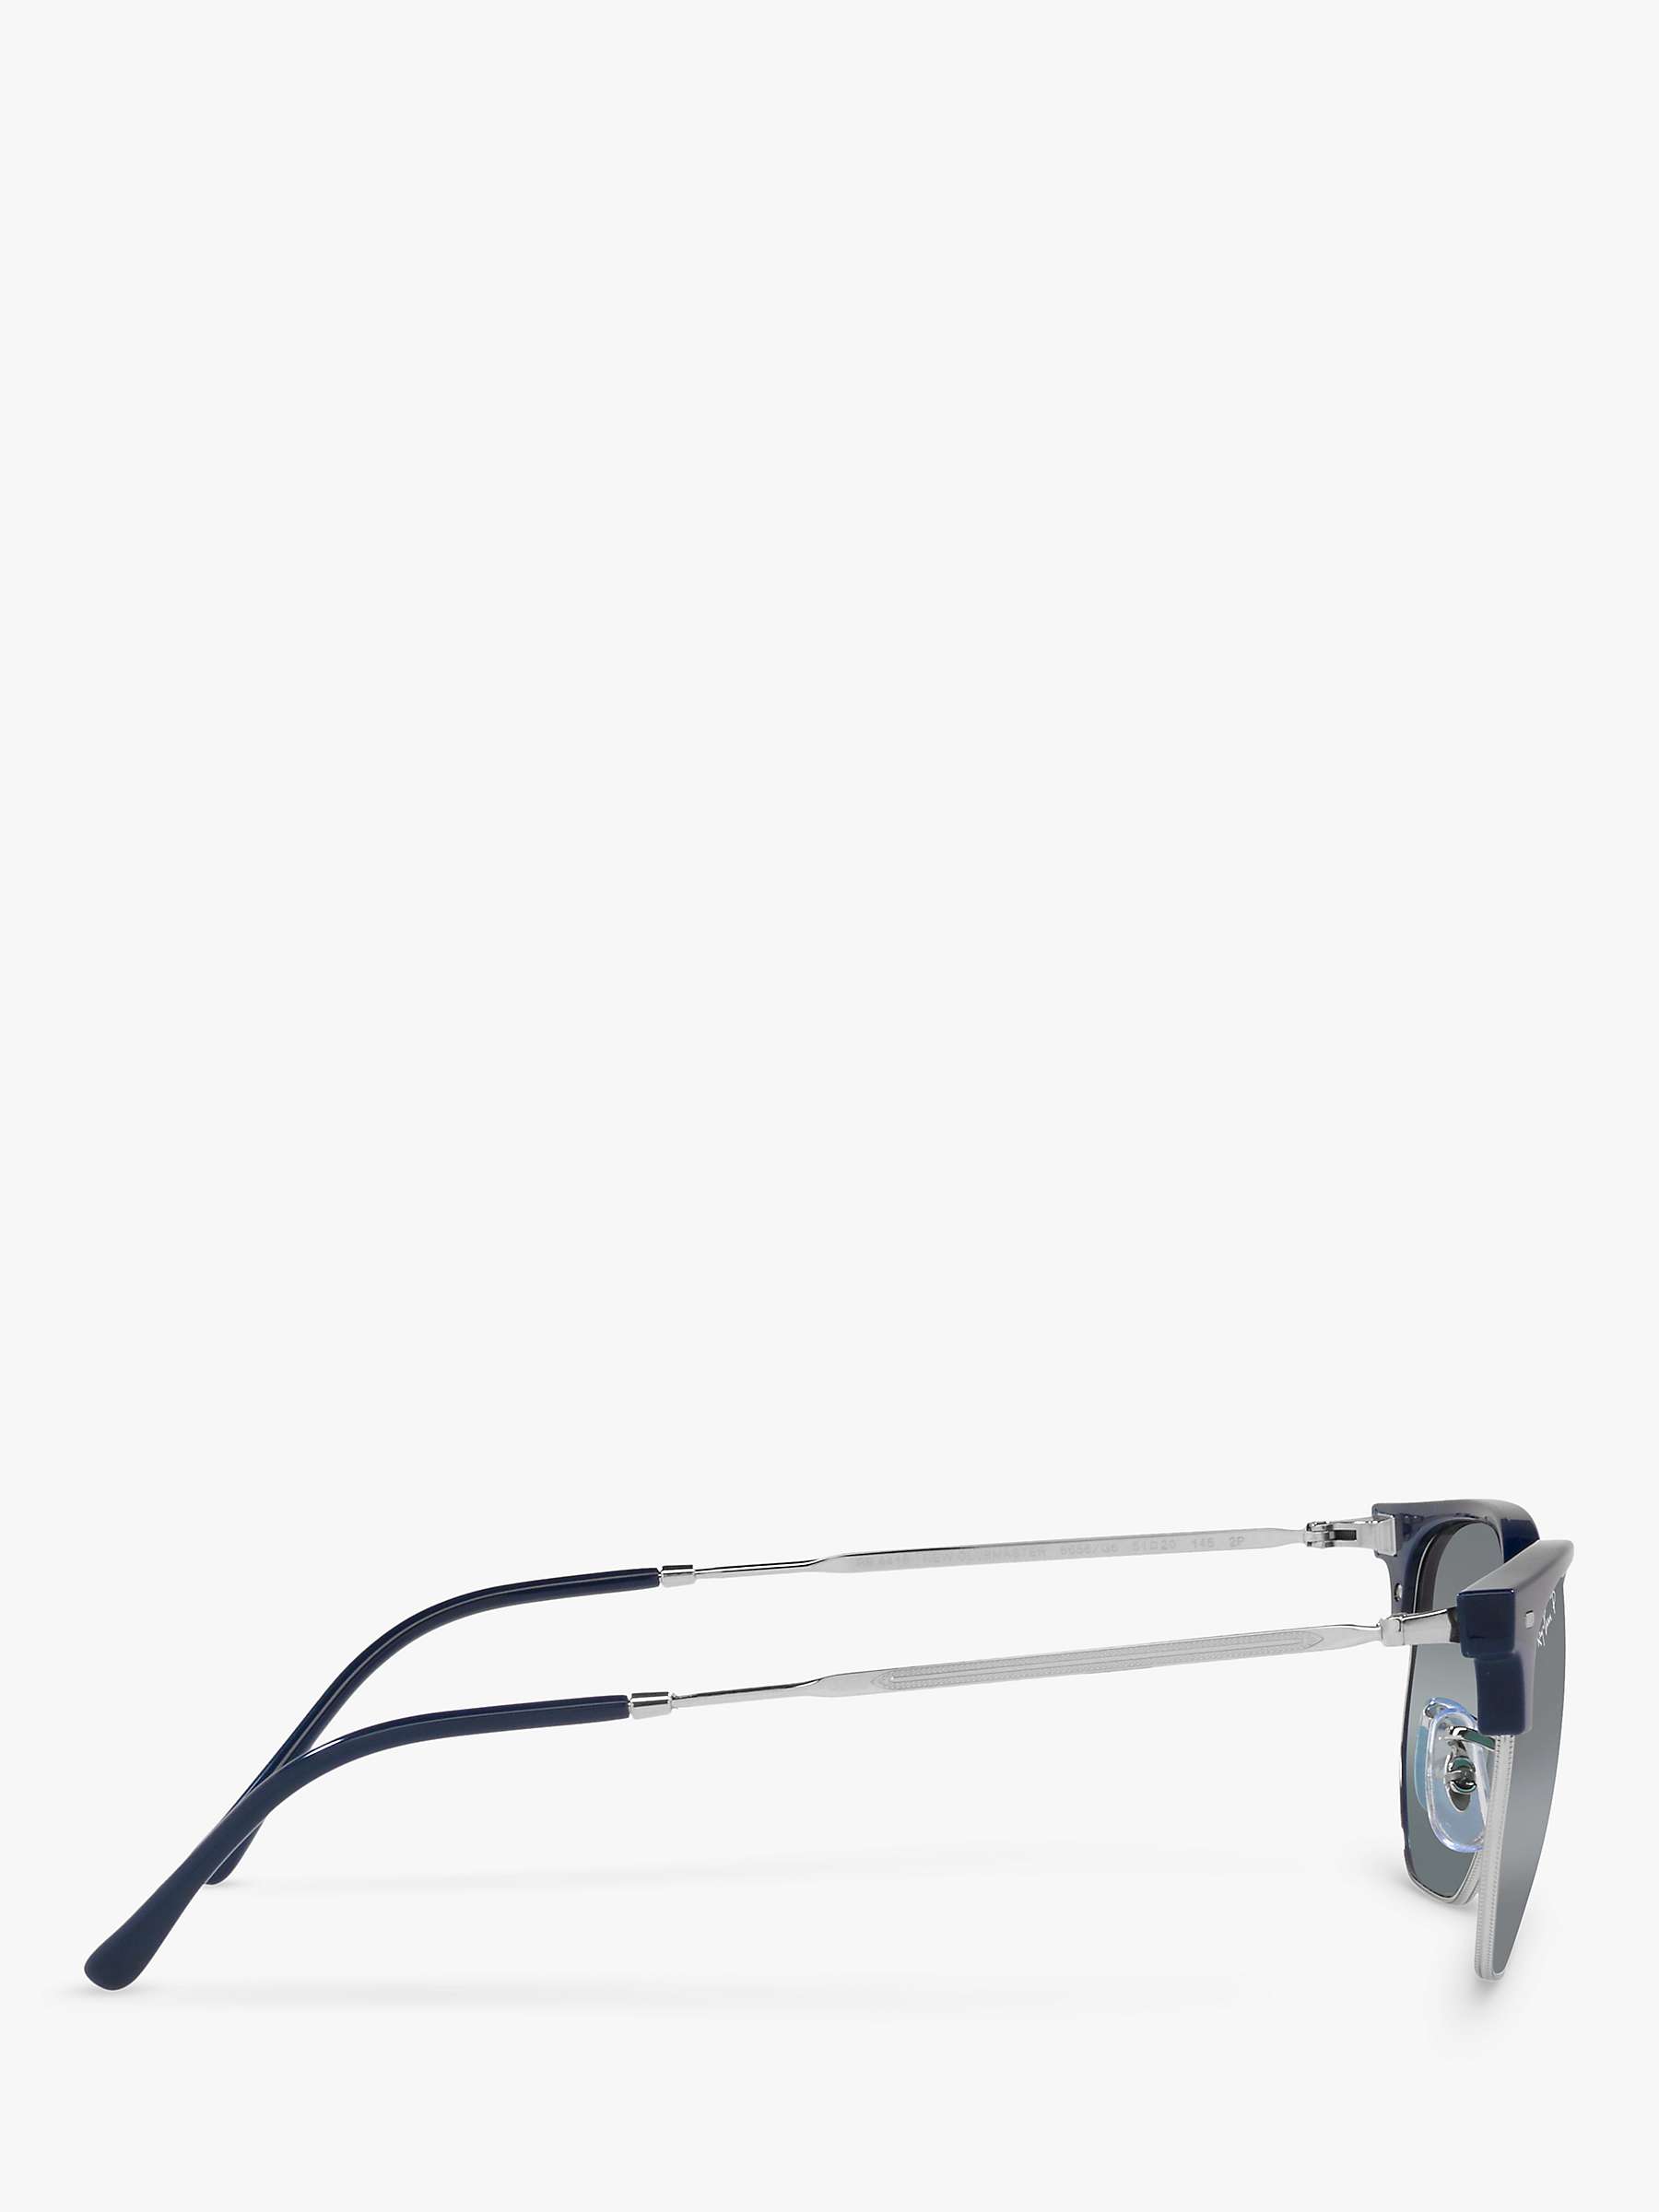 Buy Ray-Ban RB4416 New Clubmaster Sunglasses, Blue/Silver Online at johnlewis.com